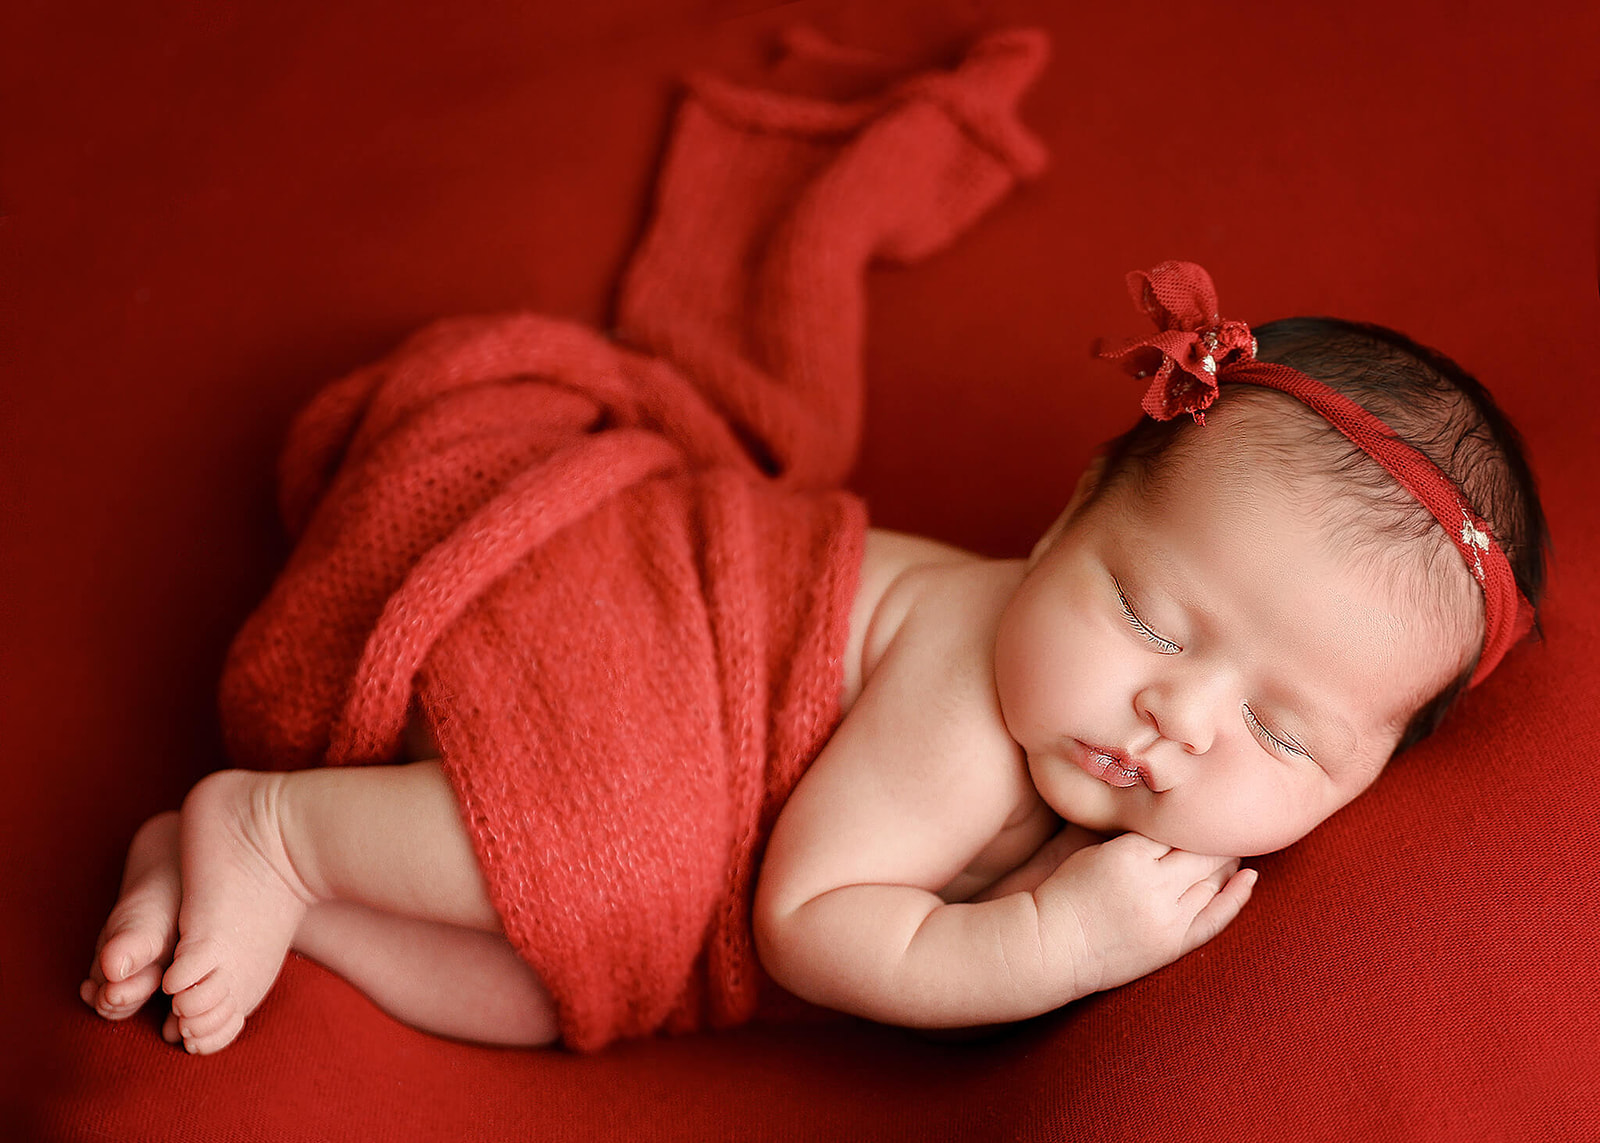 A newborn baby sleeps while wrapped in a red knit blanket wearing a red headband with a bow